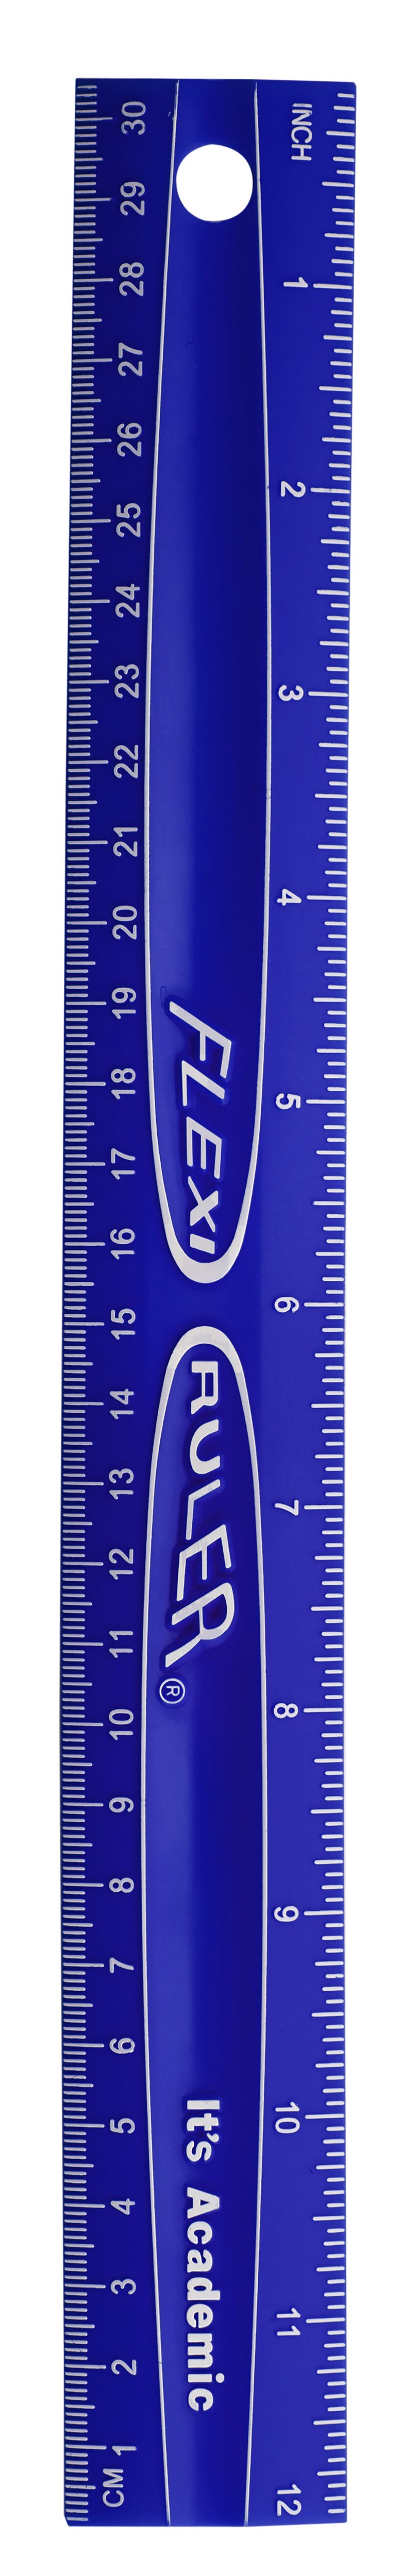 Flexible Ruler, Metric/Inches - Blue Dolphin Products